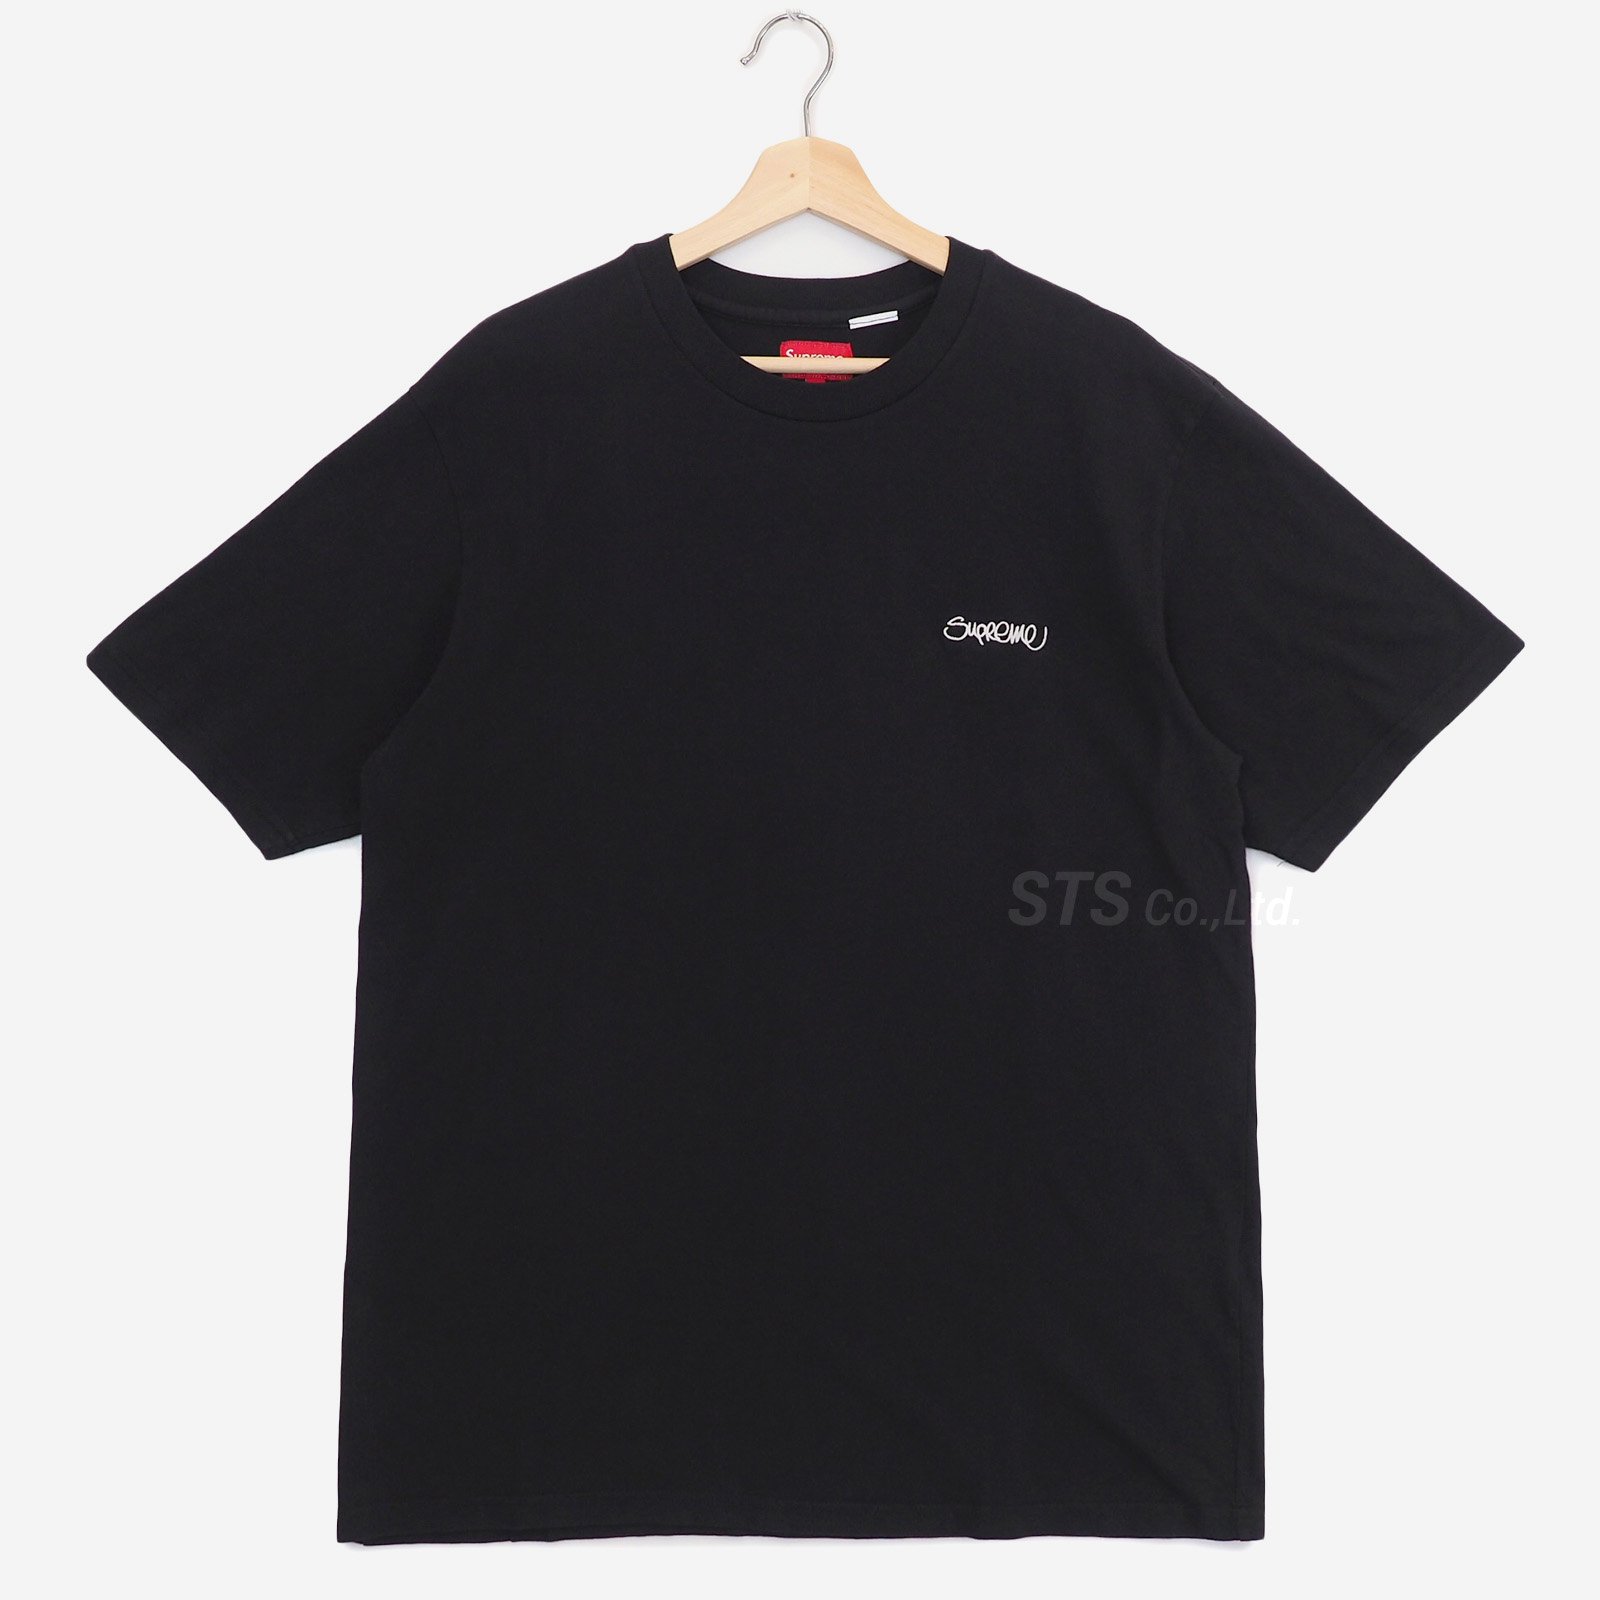 Supreme Washed Handstyle S/S Top "Plum"